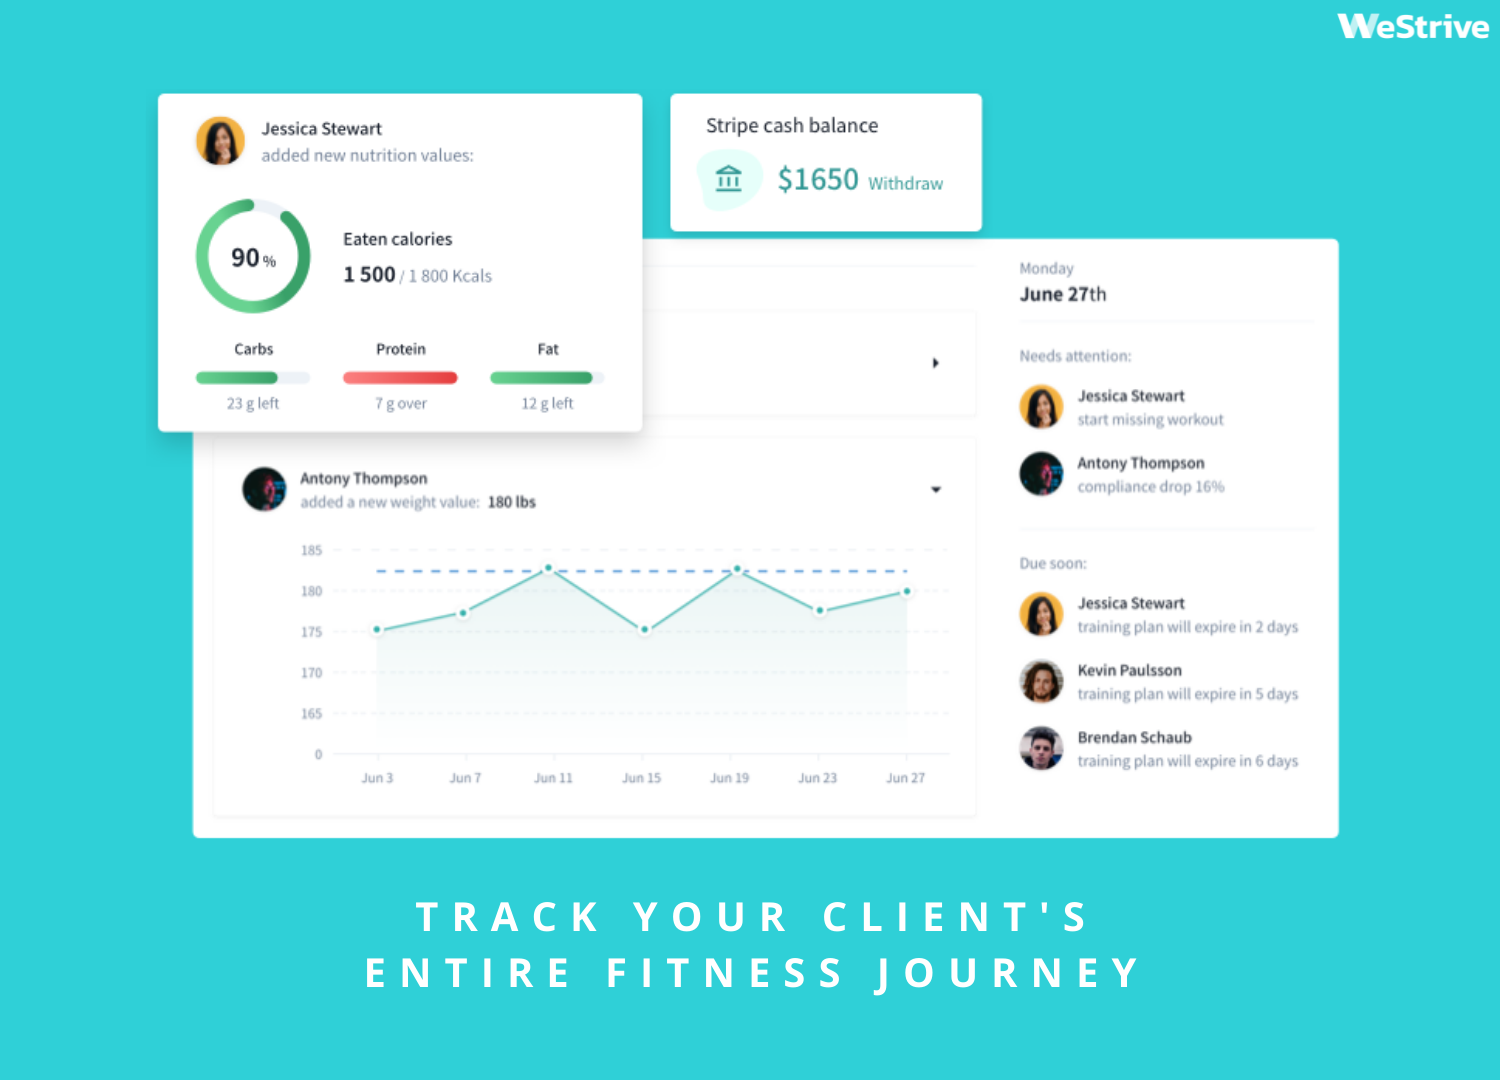 Track your client's entire fitness journey